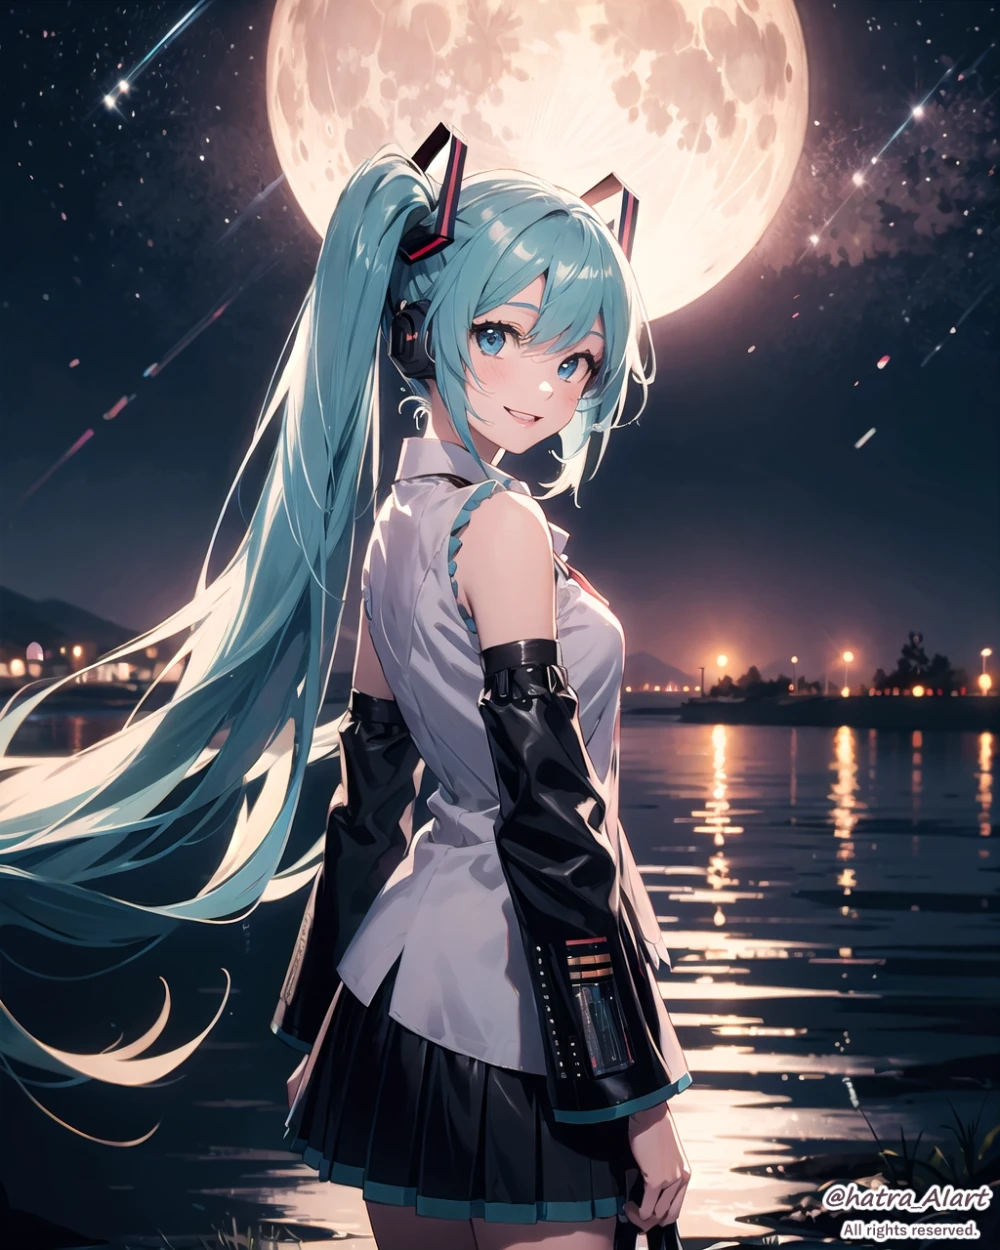 hatsune-miku-anime-style-all-ages-2-15